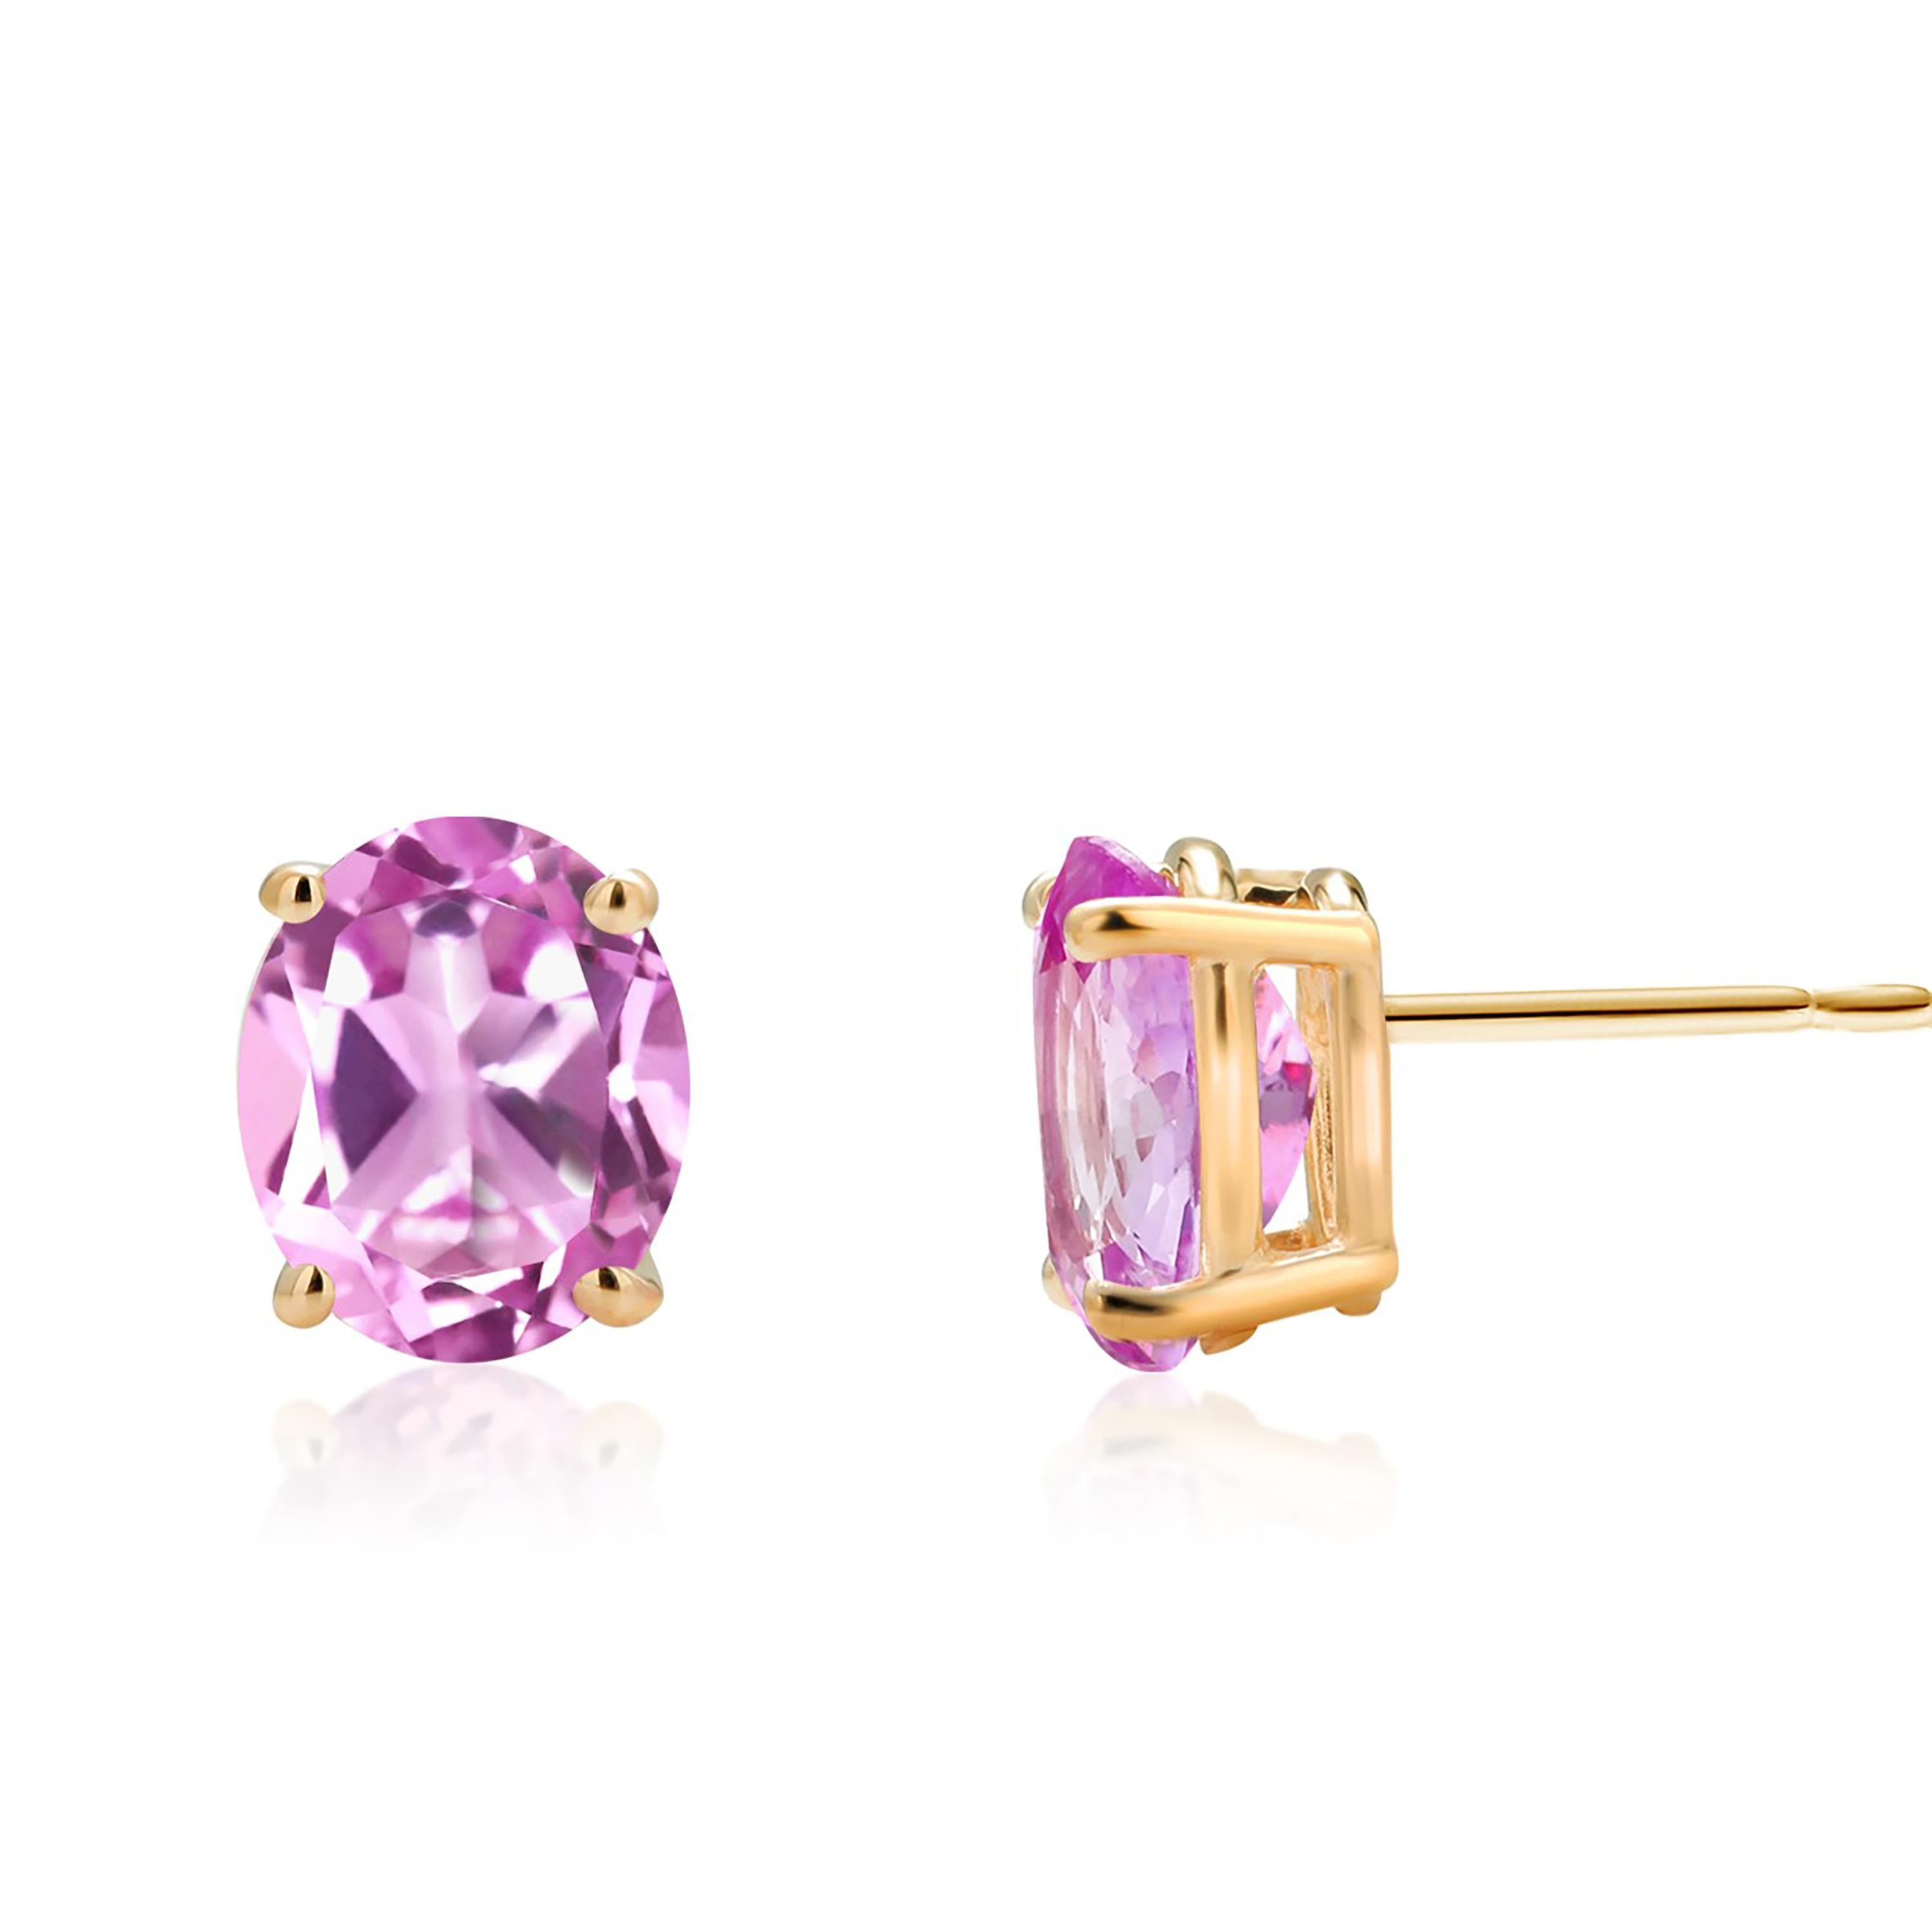 Oval Shaped Mini Ceylon Pink Sapphires Set in Yellow Gold Stud Earrings